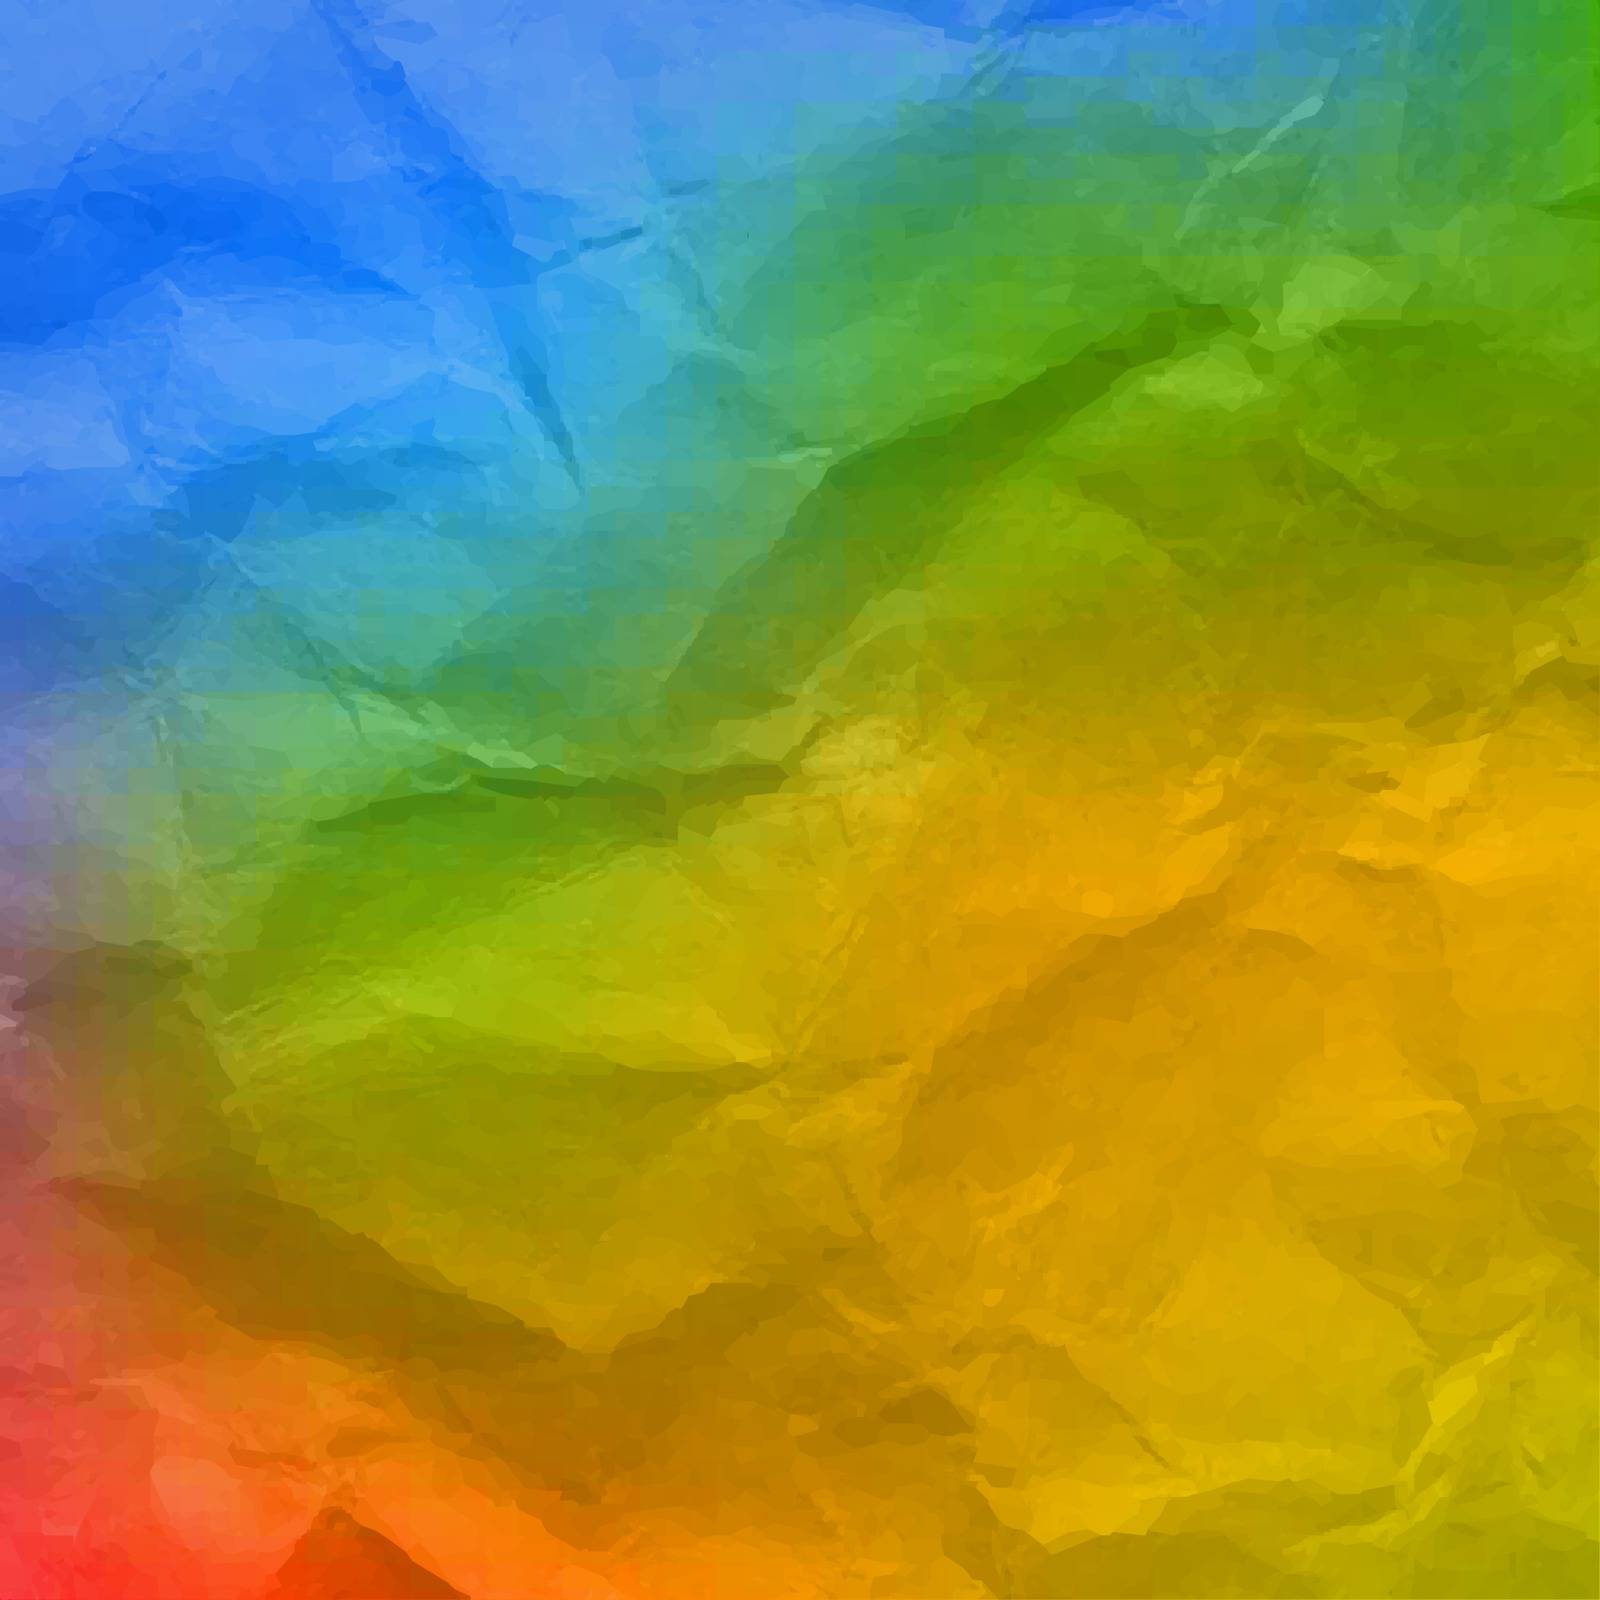 Colorful Wrinkled Wallpaper With Gradient Mesh, Vector Illustration